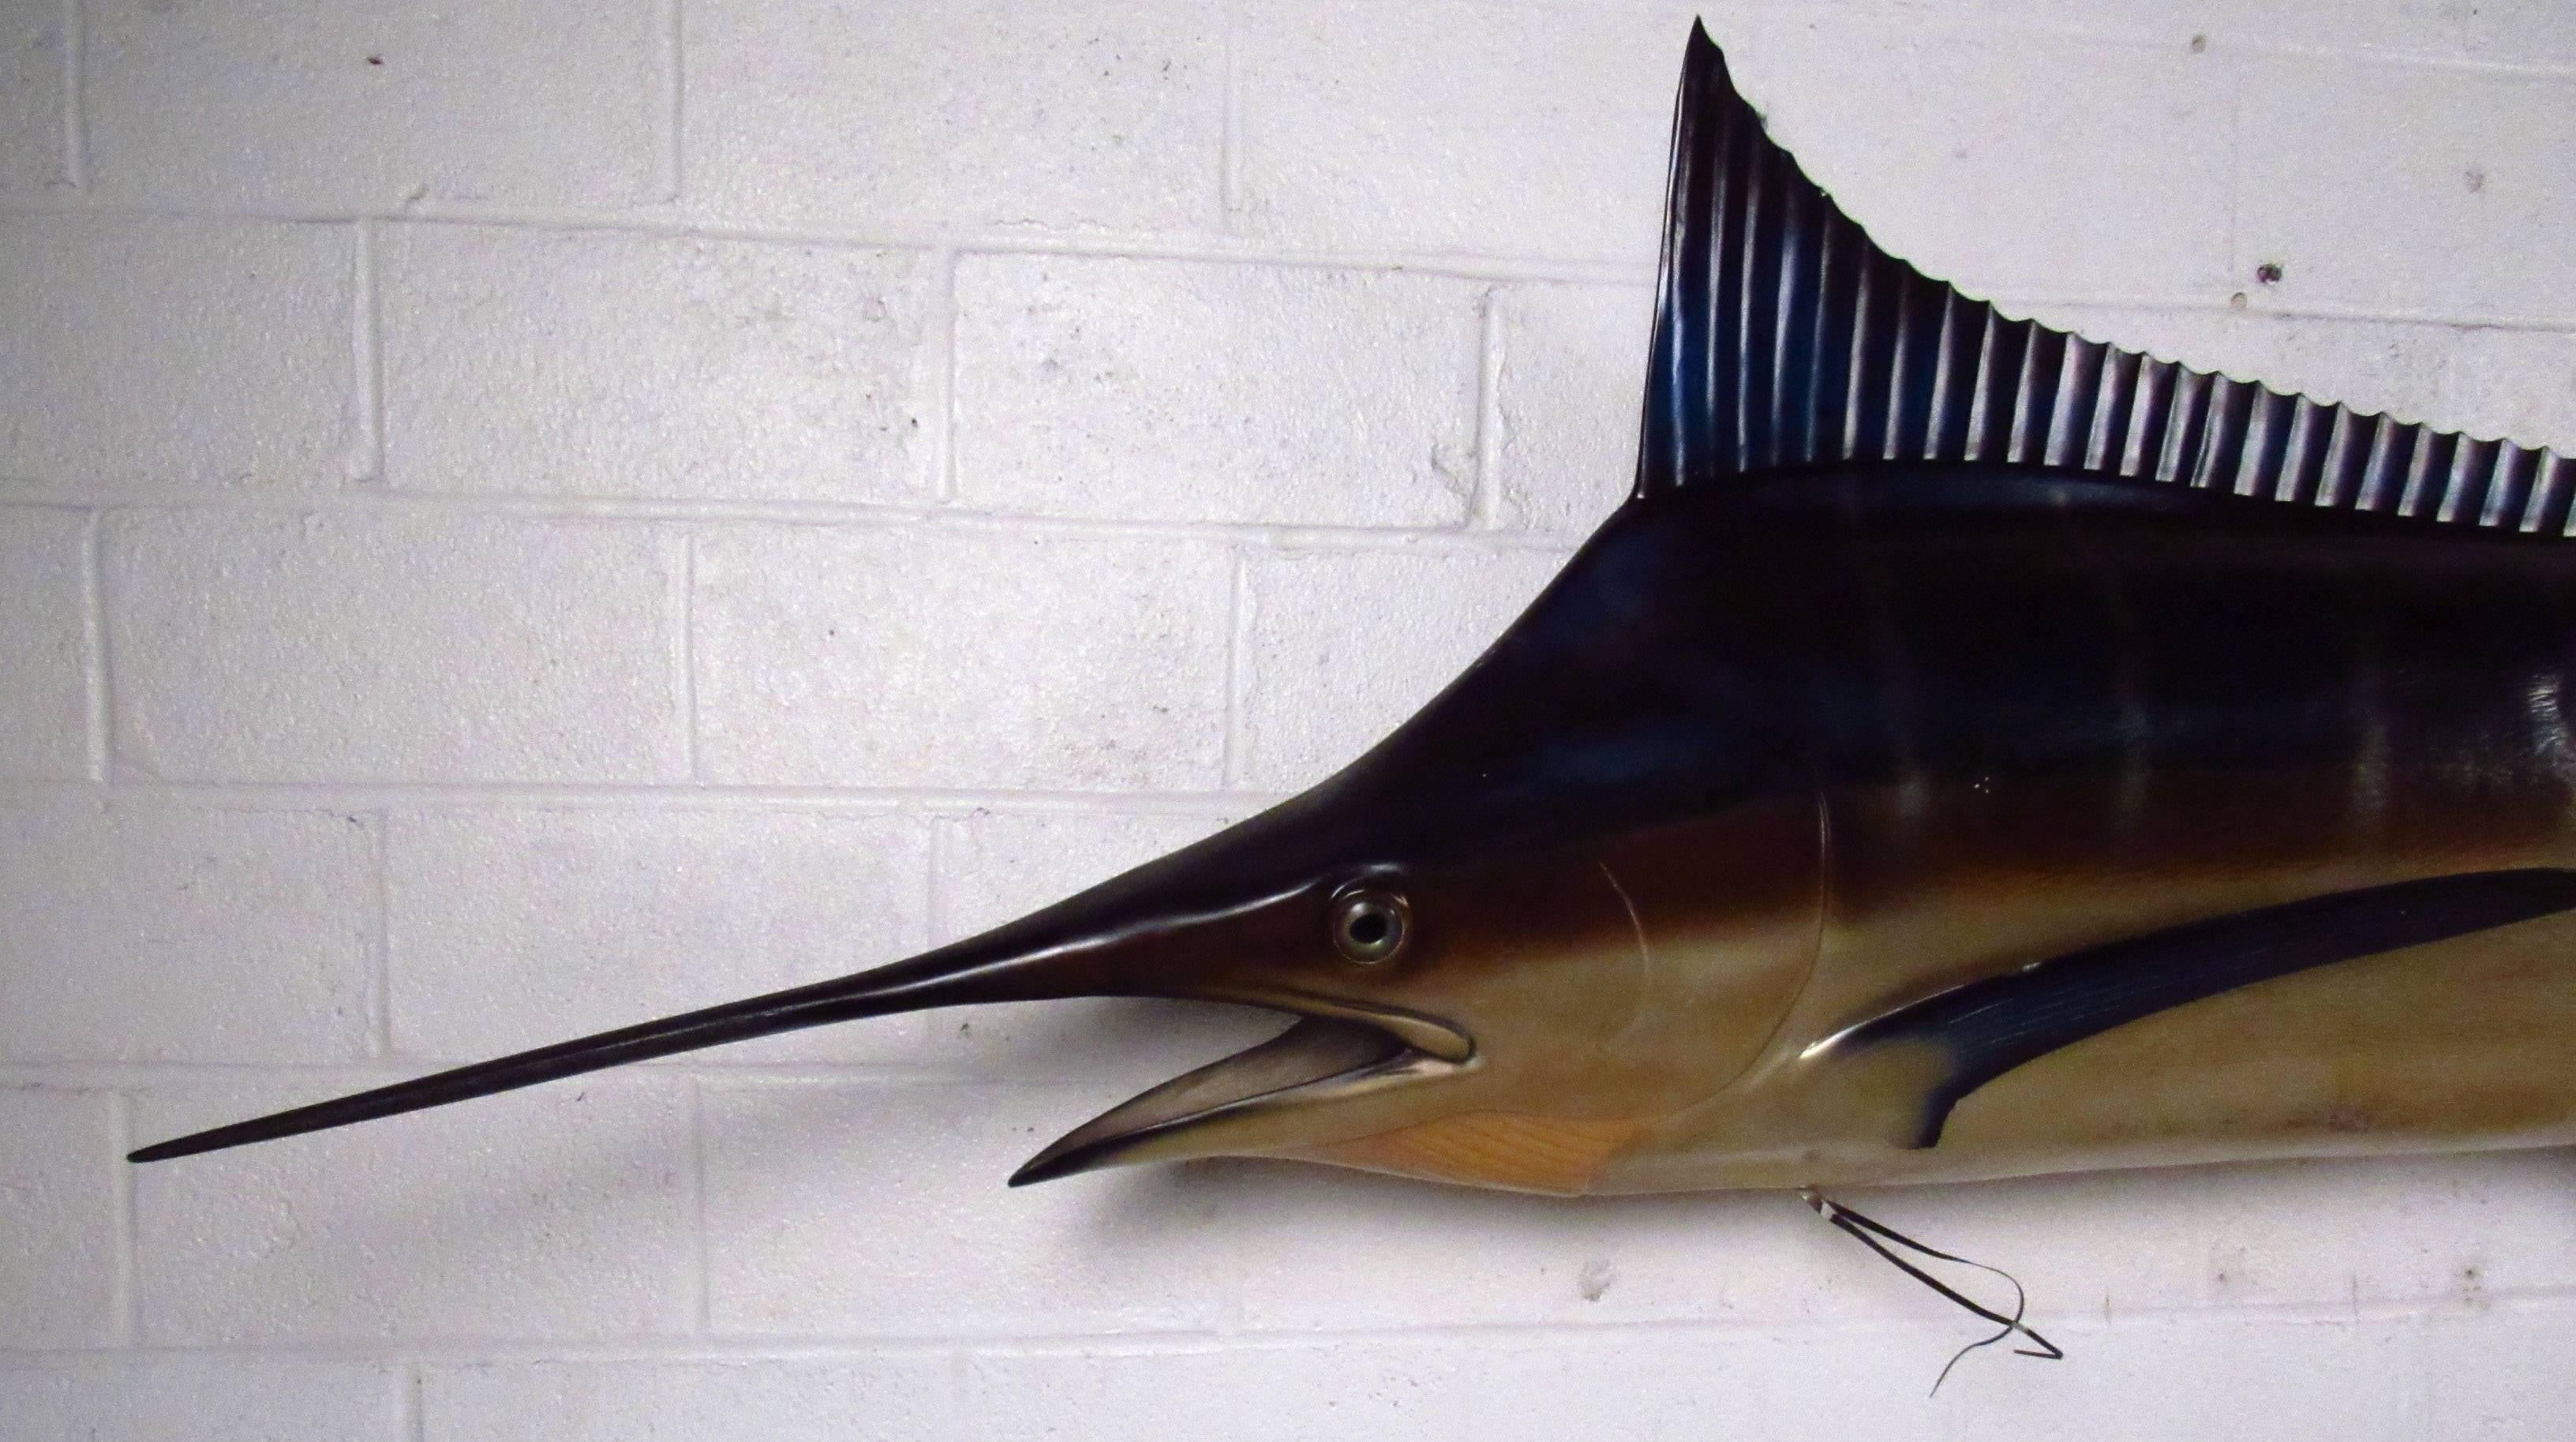 Large wall-mounted swordfish, solid fiberglass construction. Very impressive scale, sure to make a statement in any restaurant setting or beach house. Please confirm item location NY or NJ with dealer.